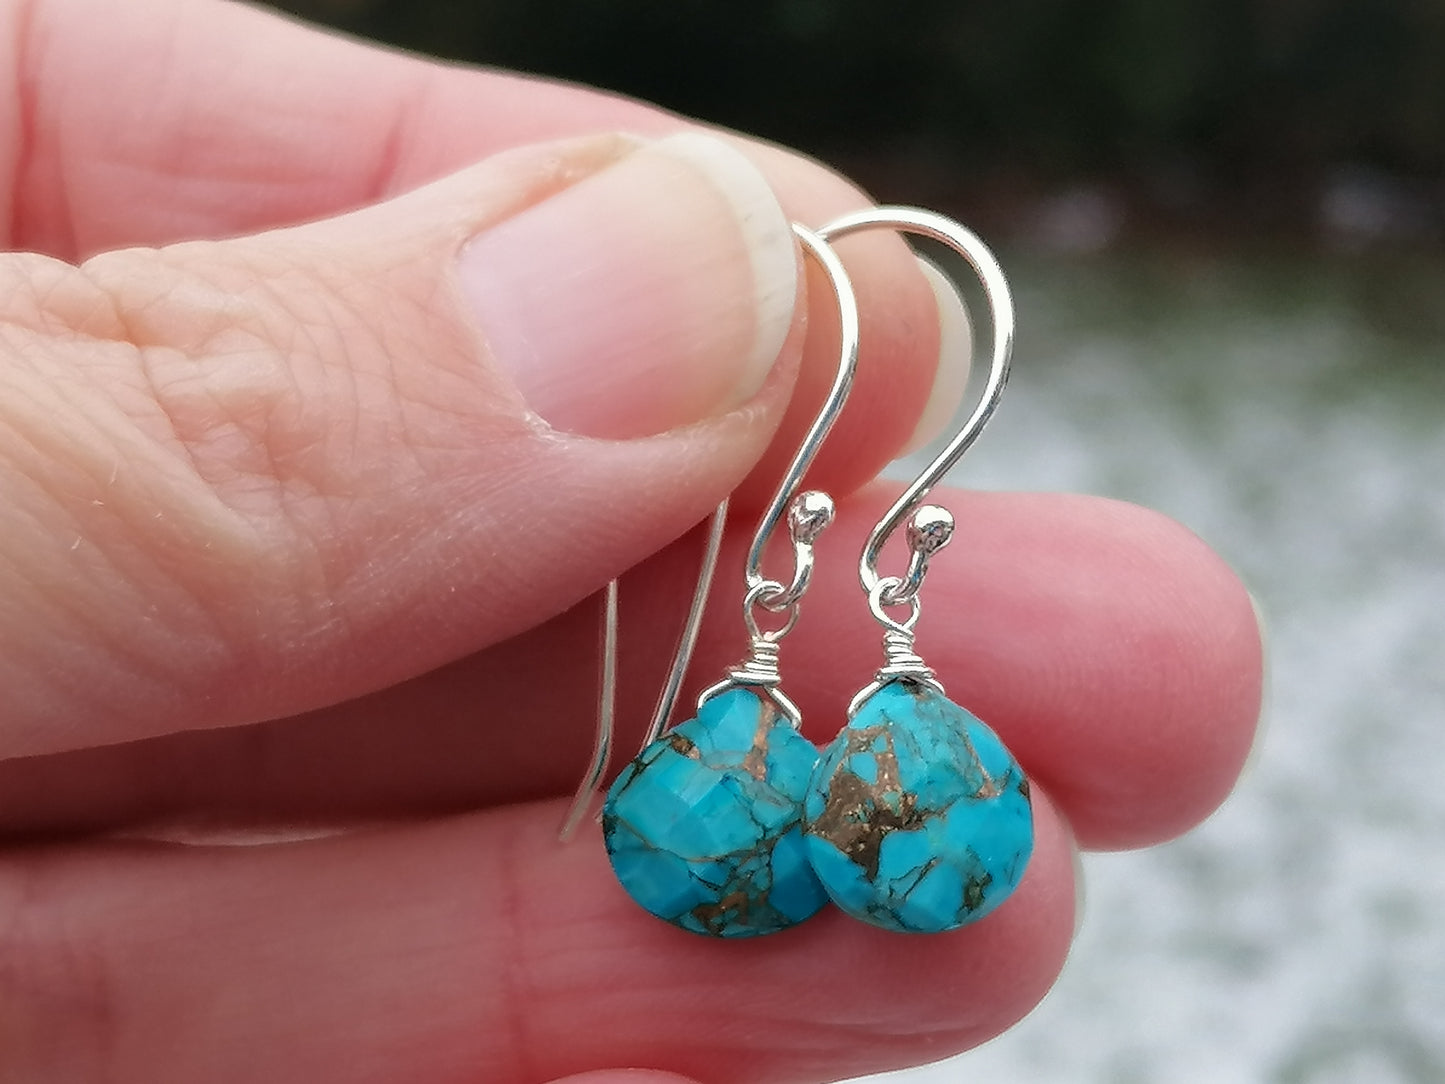 Turquoise earrings in sterling silver or gold.